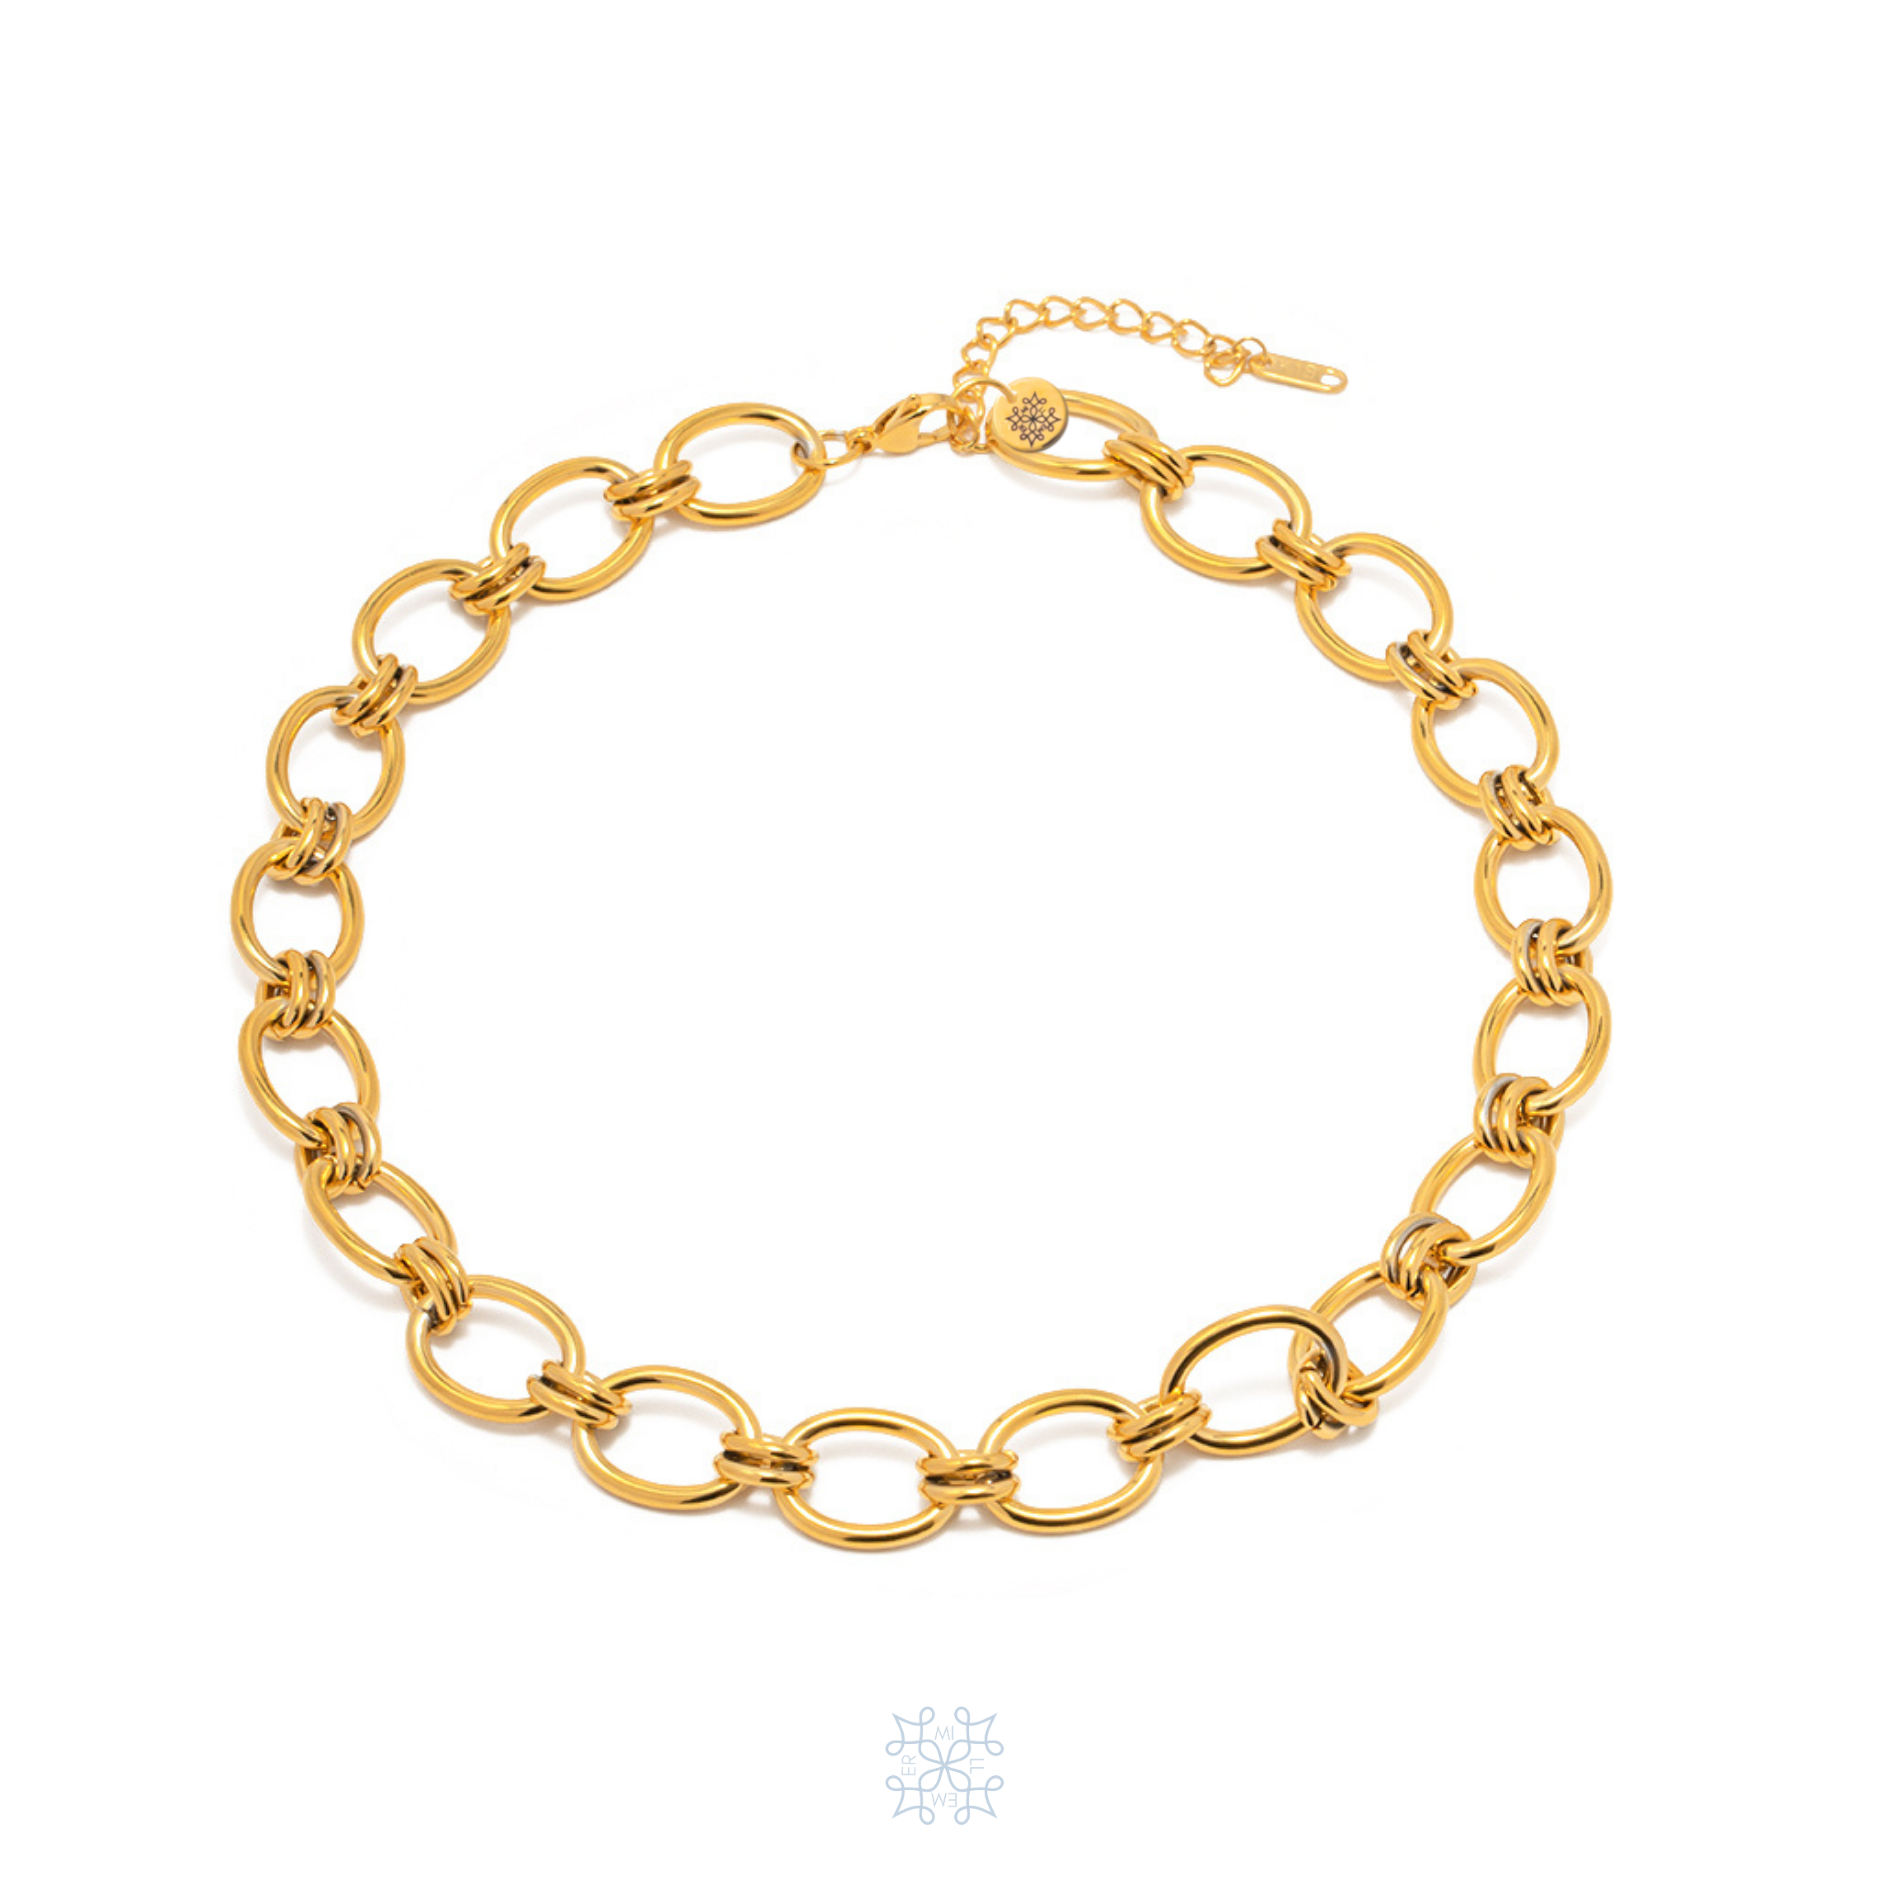 VJOSA Gold Chain Necklace - Oval shape chain pieces atached with one another. Bold Gold necklace